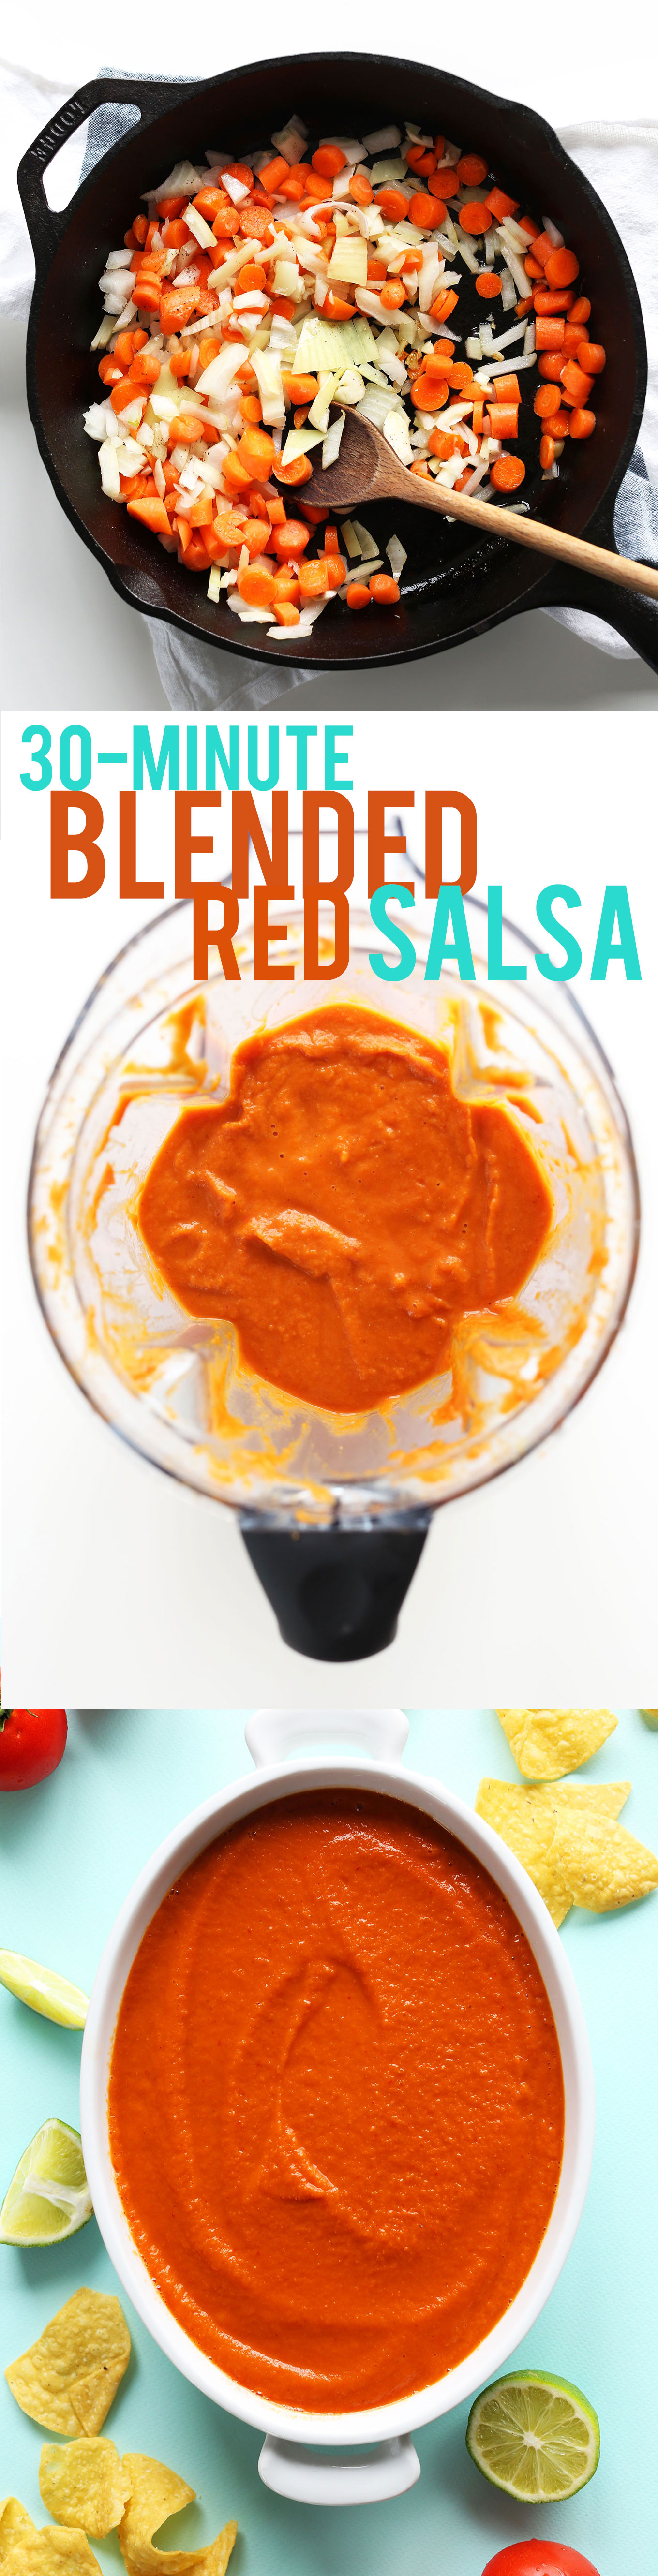 Series of photos showing the steps for making our healthy vegan Blended Red Salsa